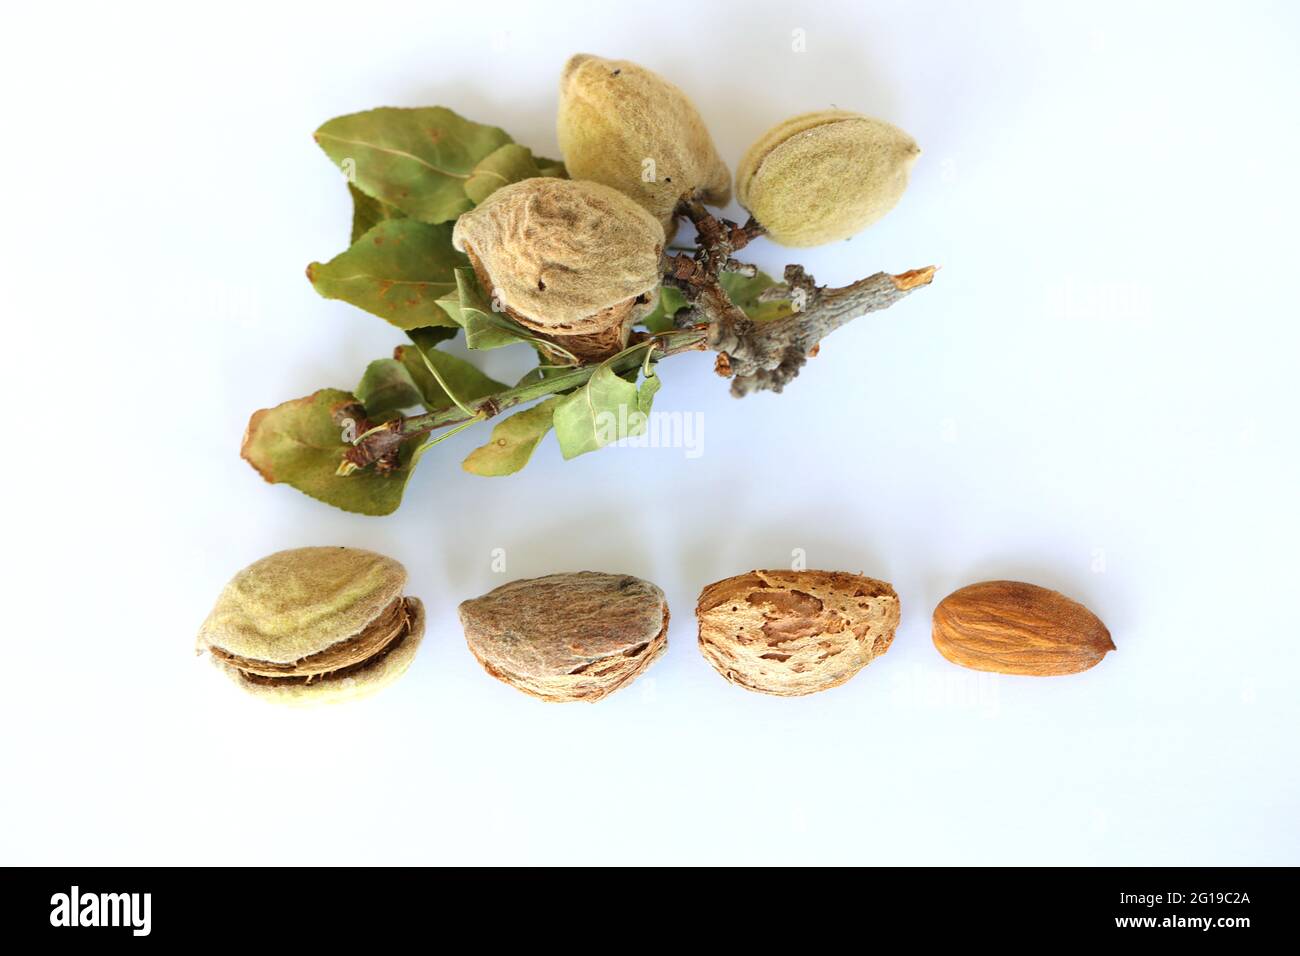 All stages of Almond growth and development.  Stock Photo